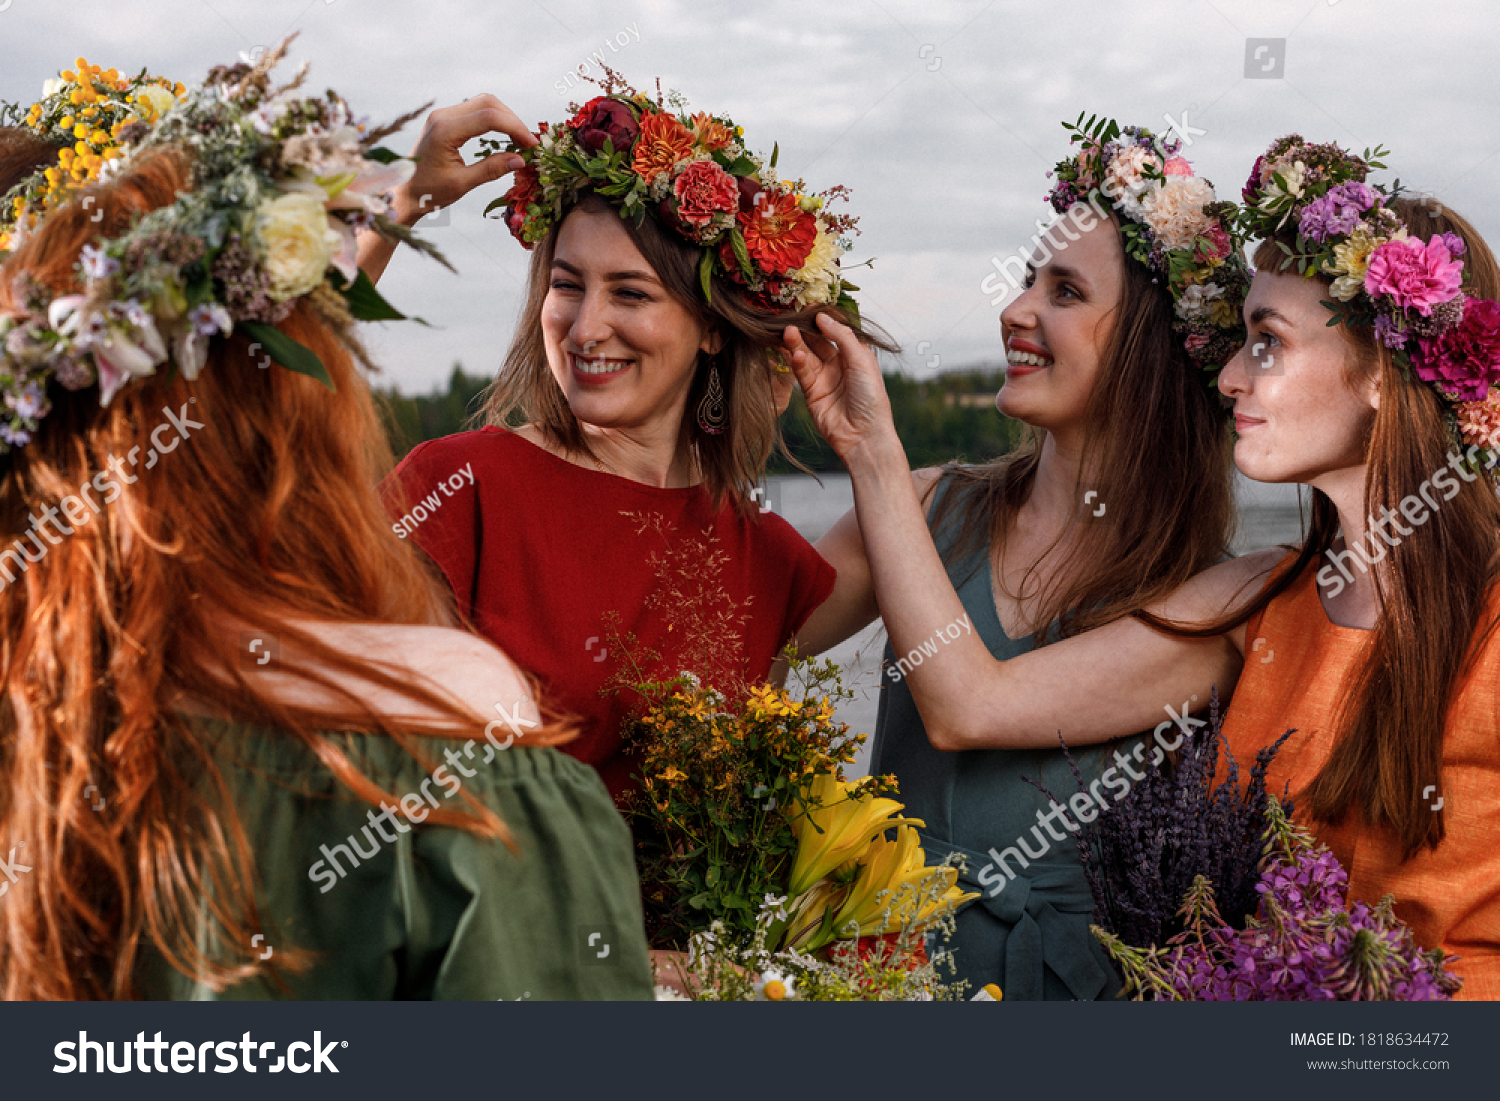 Lovely women's in flower wreaths in nature. Ancient pagan origin celebration concept. Summer solstice day. Mid summer. #1818634472